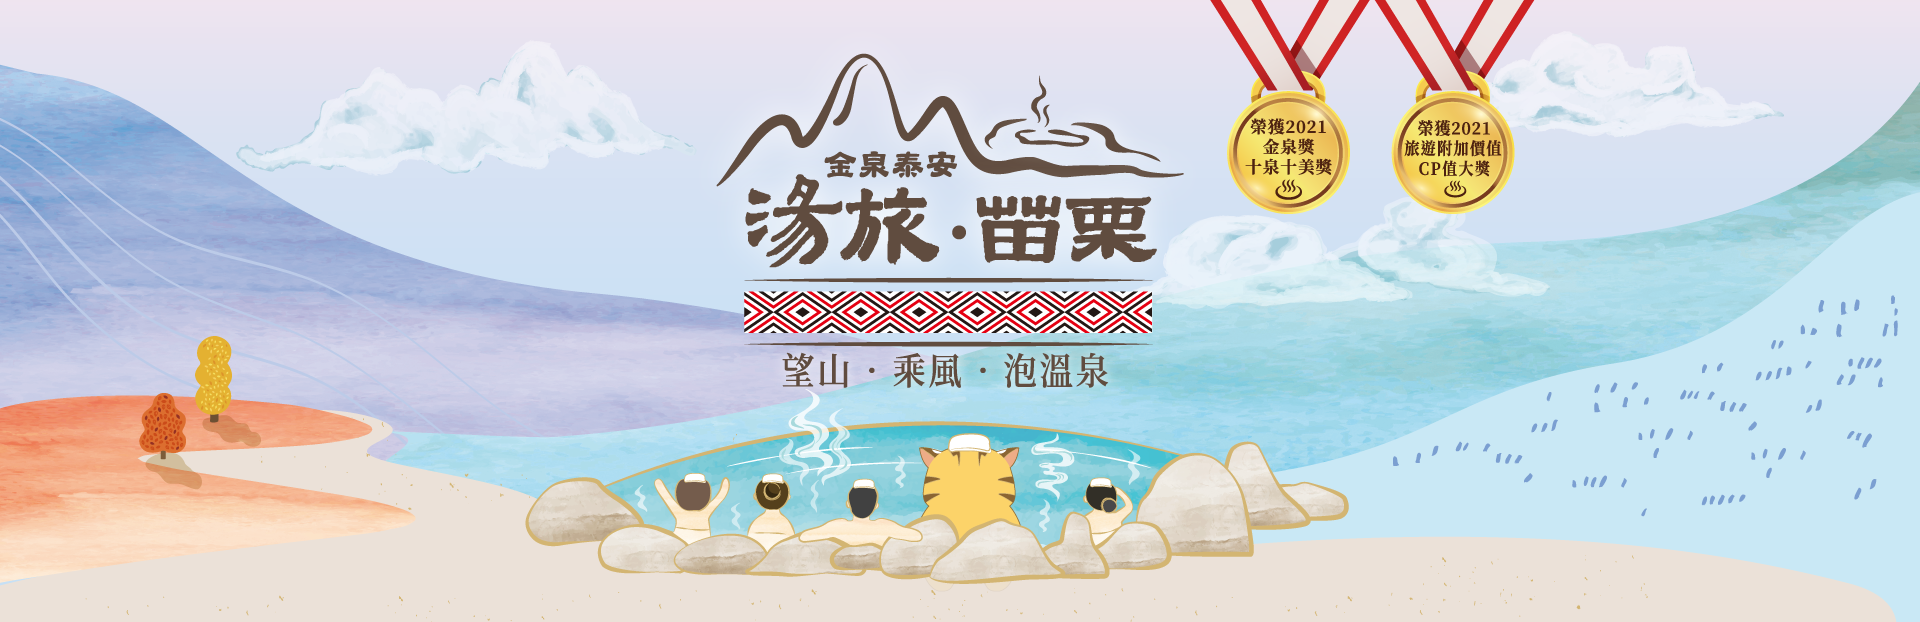 The event of the Top Hot Spring of Tai An • Interesting Stamp Collection of Hot Spring Trip of Miao Li